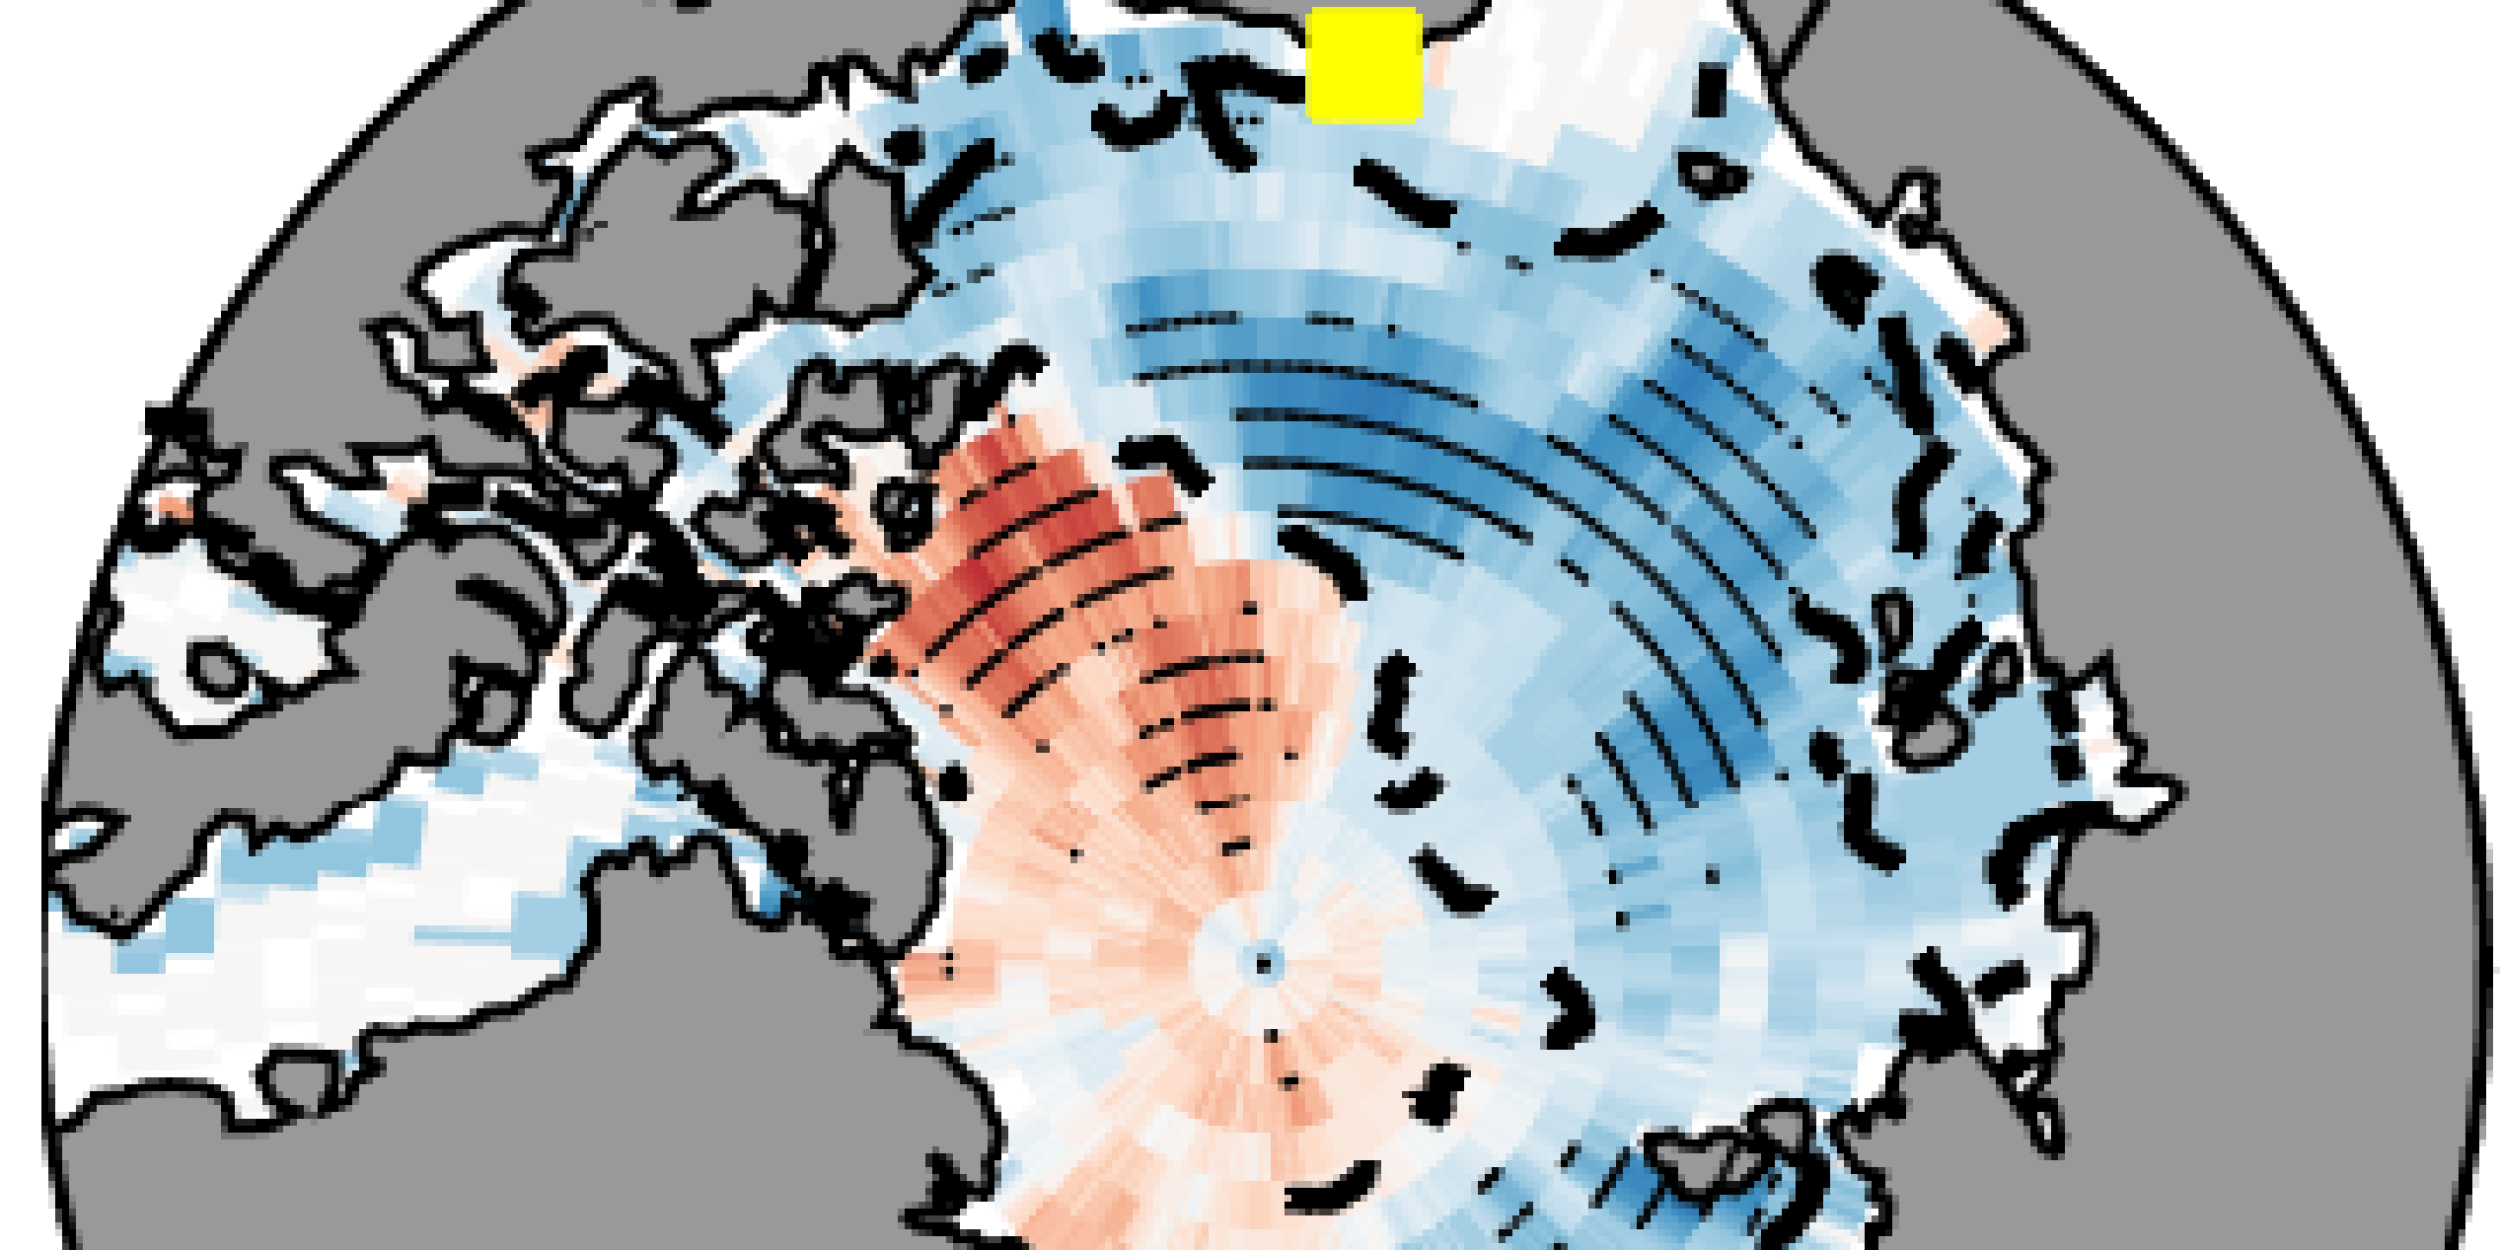 (a) Correlation coefficient (r) between the April-May anomaly in downwelling all-wave radiative flux measured at Barrow and the sea ice concentration for the following September in each grid cell of HadISST, 1993-2014. Regions of negative correlation indicate that positive anomalies measured in spring at Barrow were followed by negative anomalies in sea ice concentration. Black dots mark grid cells where the correlation is statistically significant (p < 0.05). (b) Standard deviation in September mean sea ice concentration in each grid cell of the HadISST data set from 1993-2014. The yellow square in both panels is the location of Barrow. The dashed-black line in both panels is the 20% standard deviation contour line for sea ice concentration in panel (b).